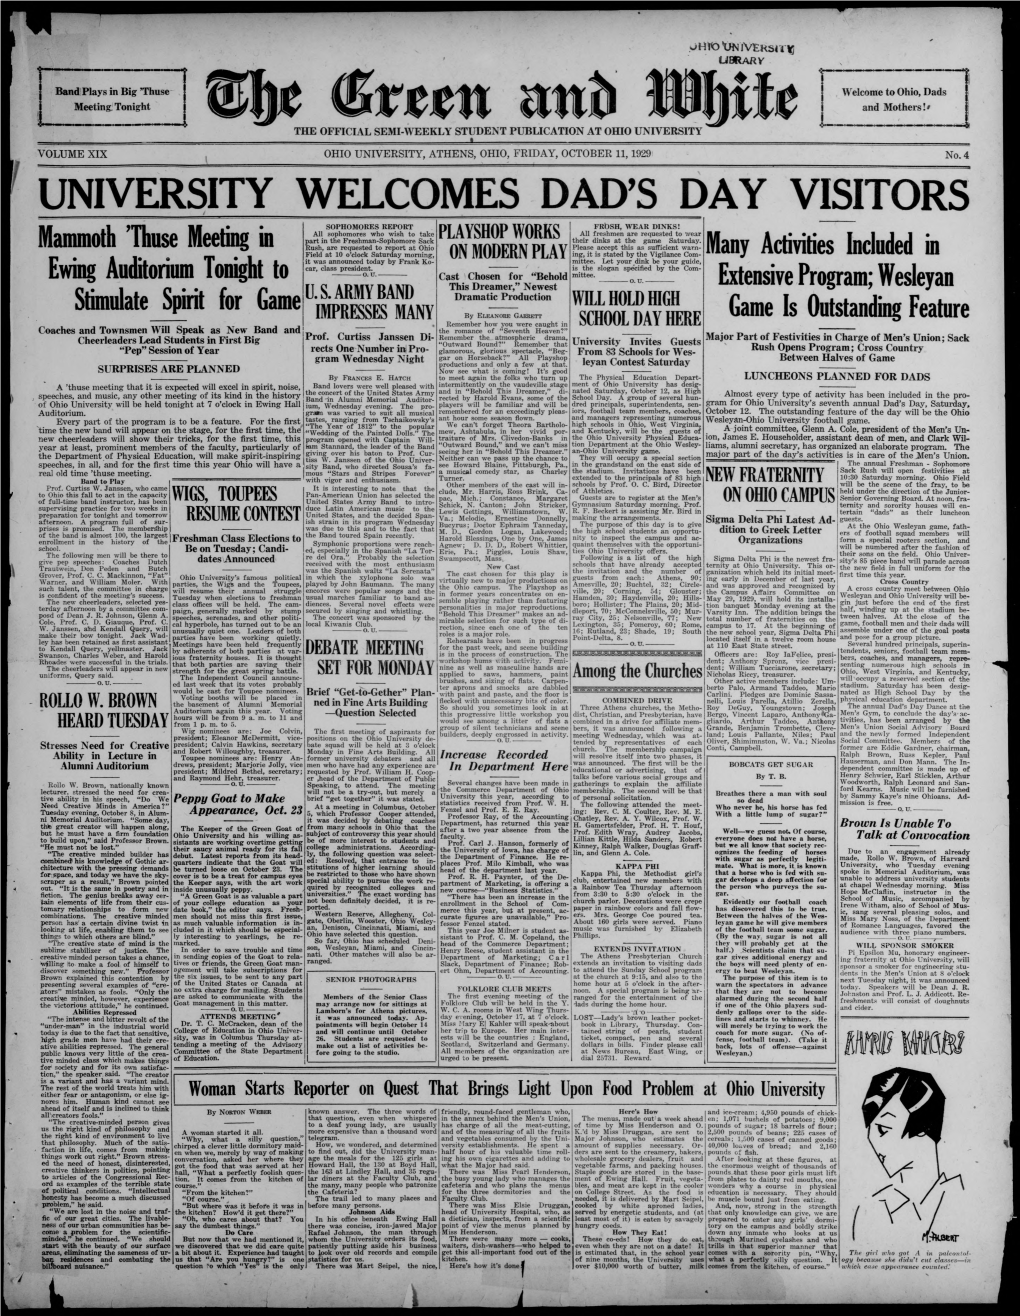 University Welcomes Dad's Day Visitors